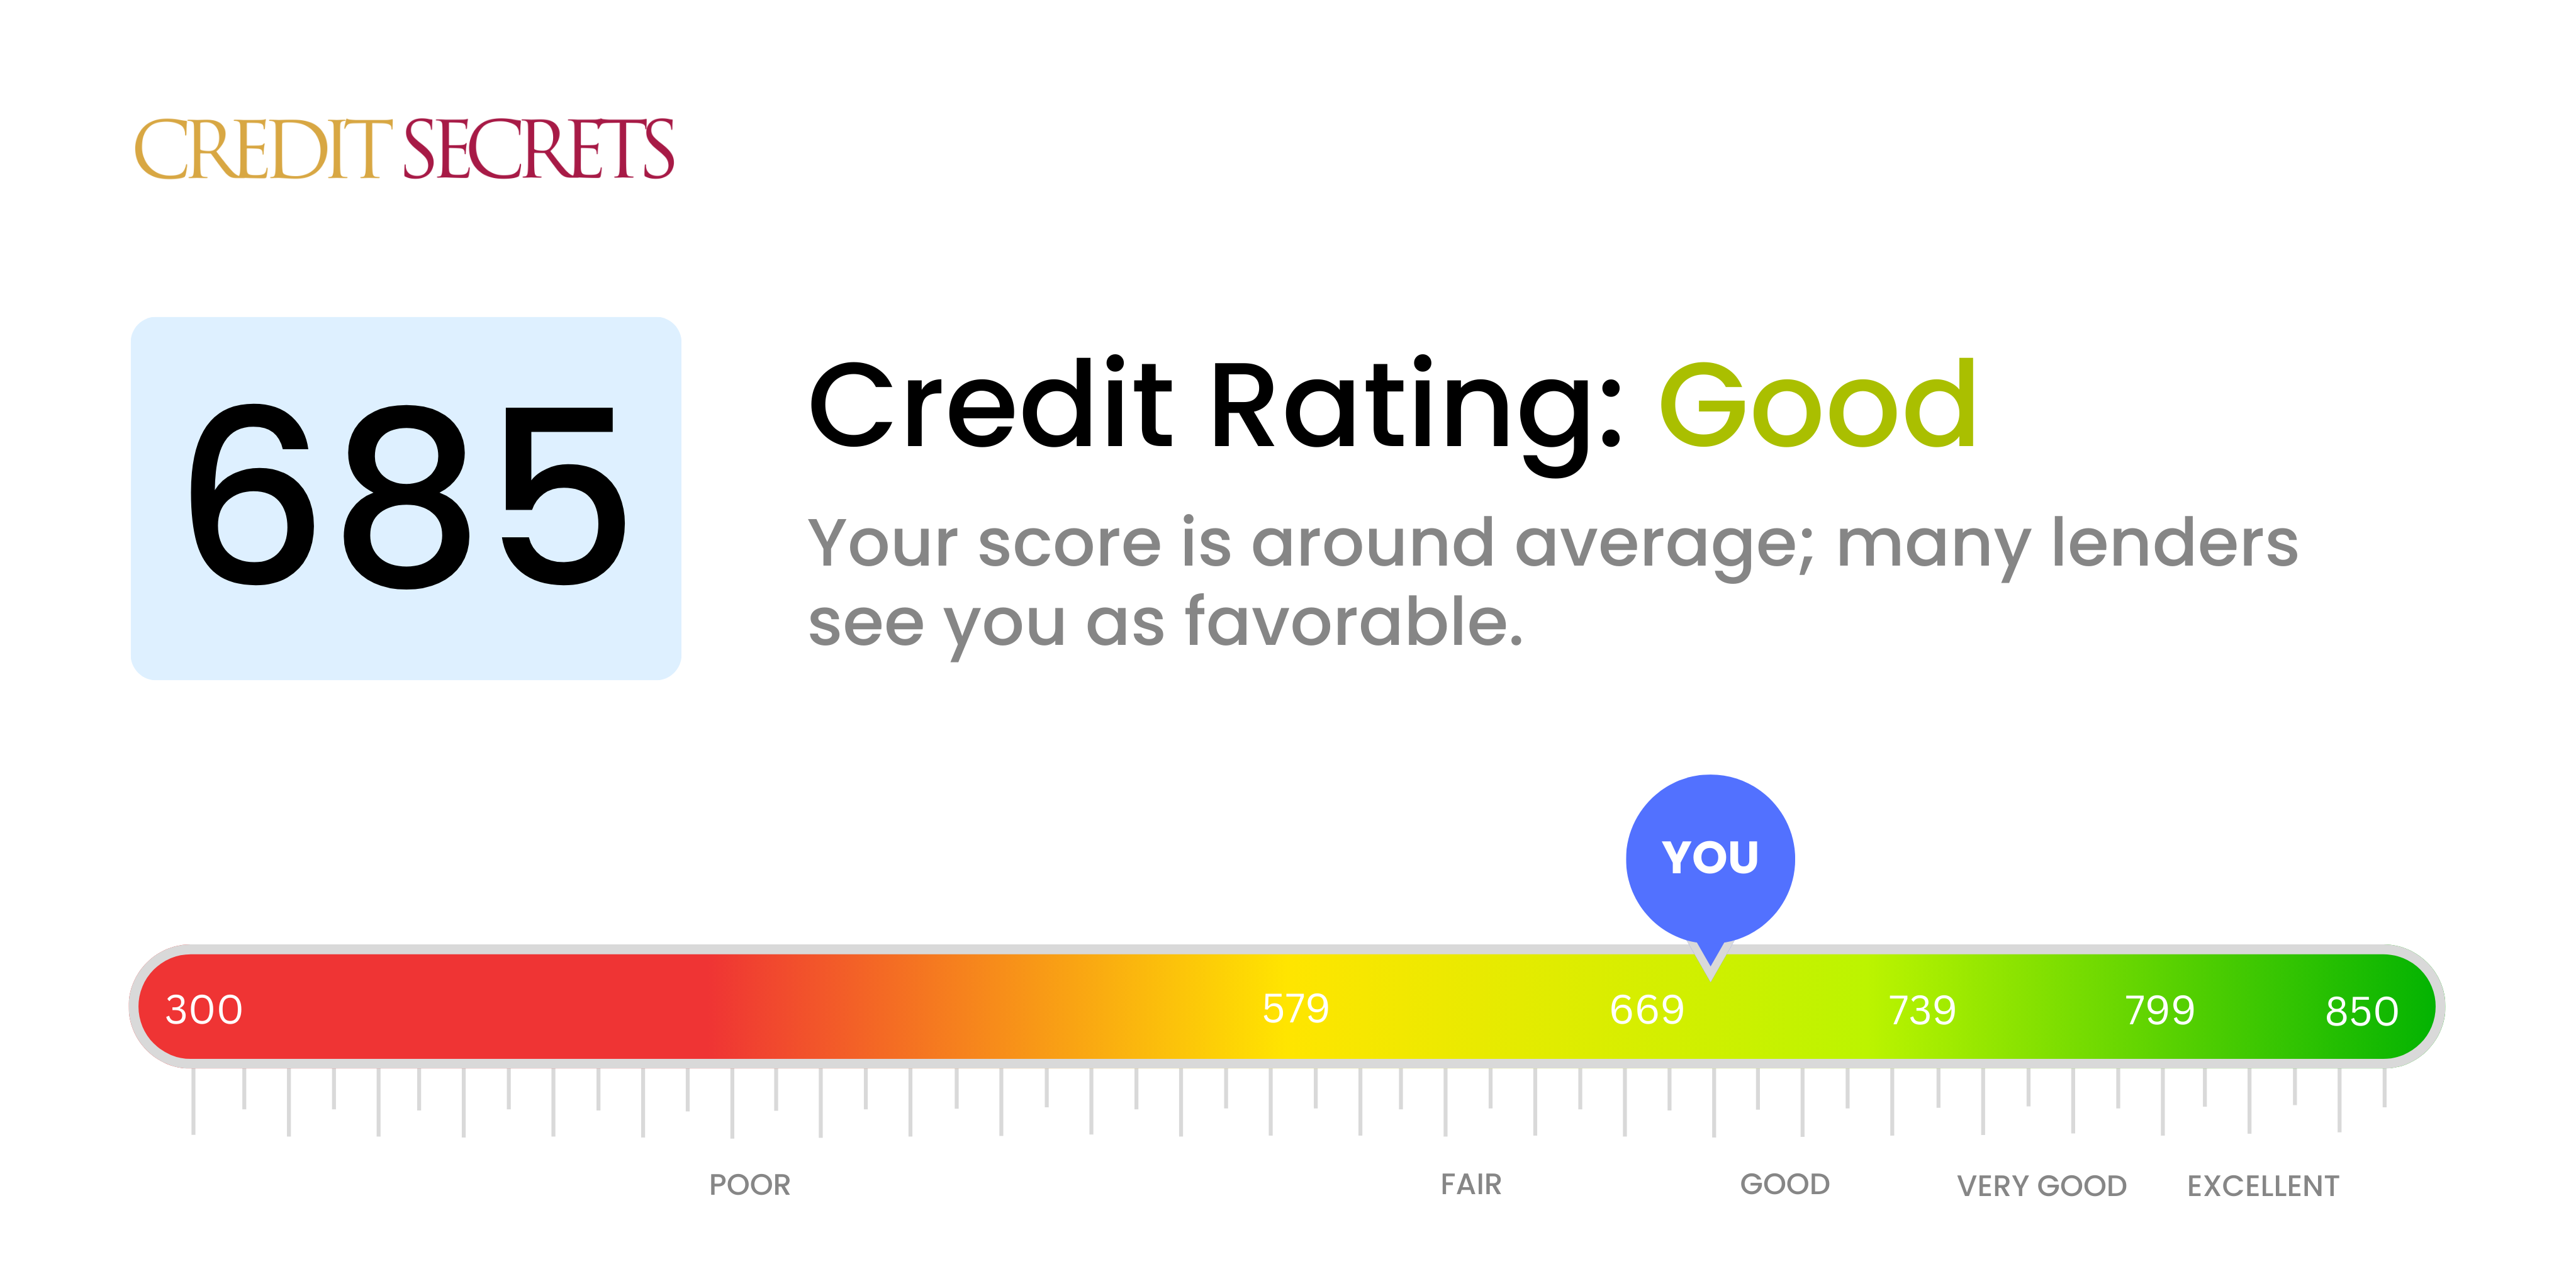 Is 685 a good credit score?